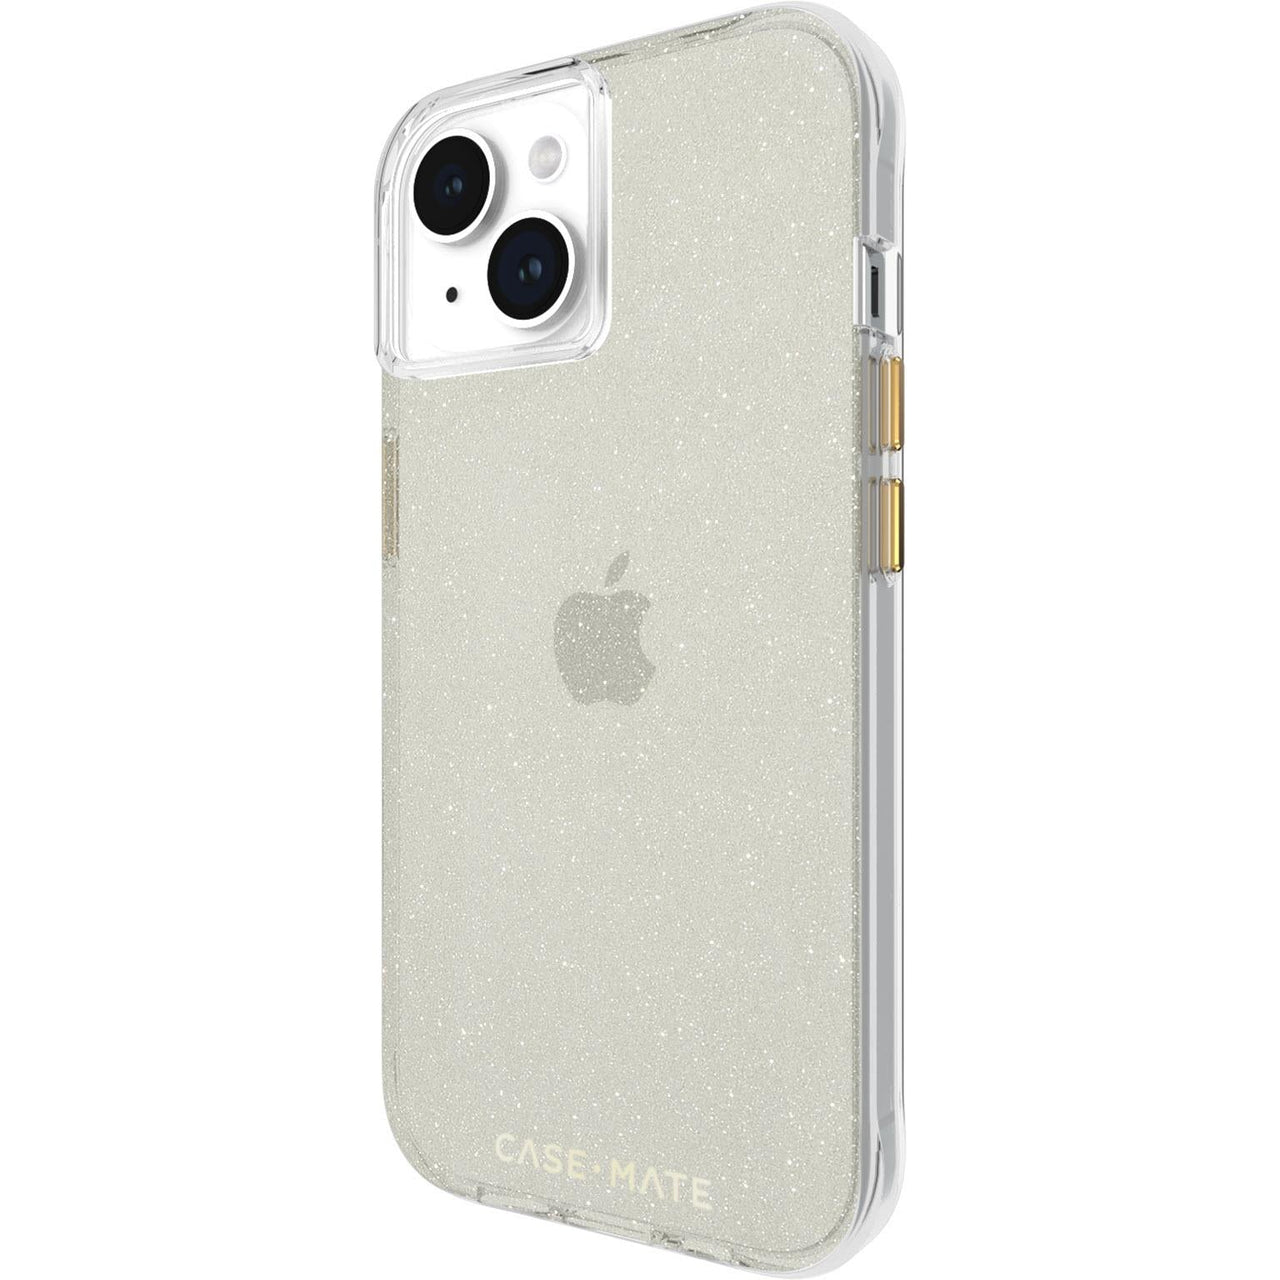 Case-Mate Sheer Crystal Case For iPhone 15 / iPhone 14 / iPhone 13 - Gold